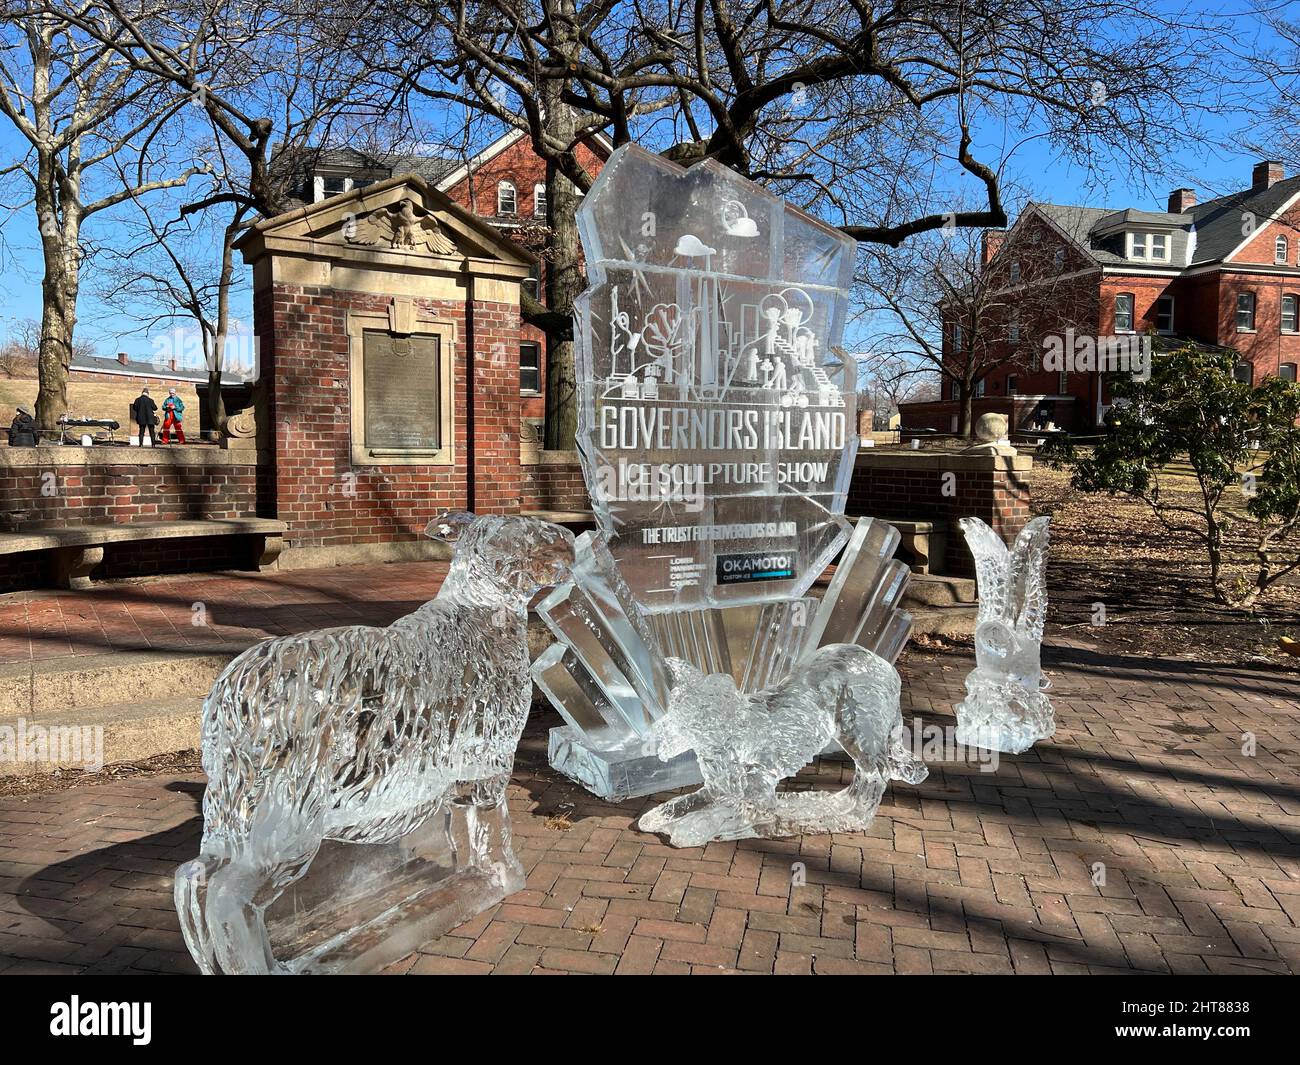 February 26, 2022 - Governors Island, New York, NY, USA. Ice Sculpture Show at Governors Island, one of the 2022 Winter Village events on the island. Stock Photo